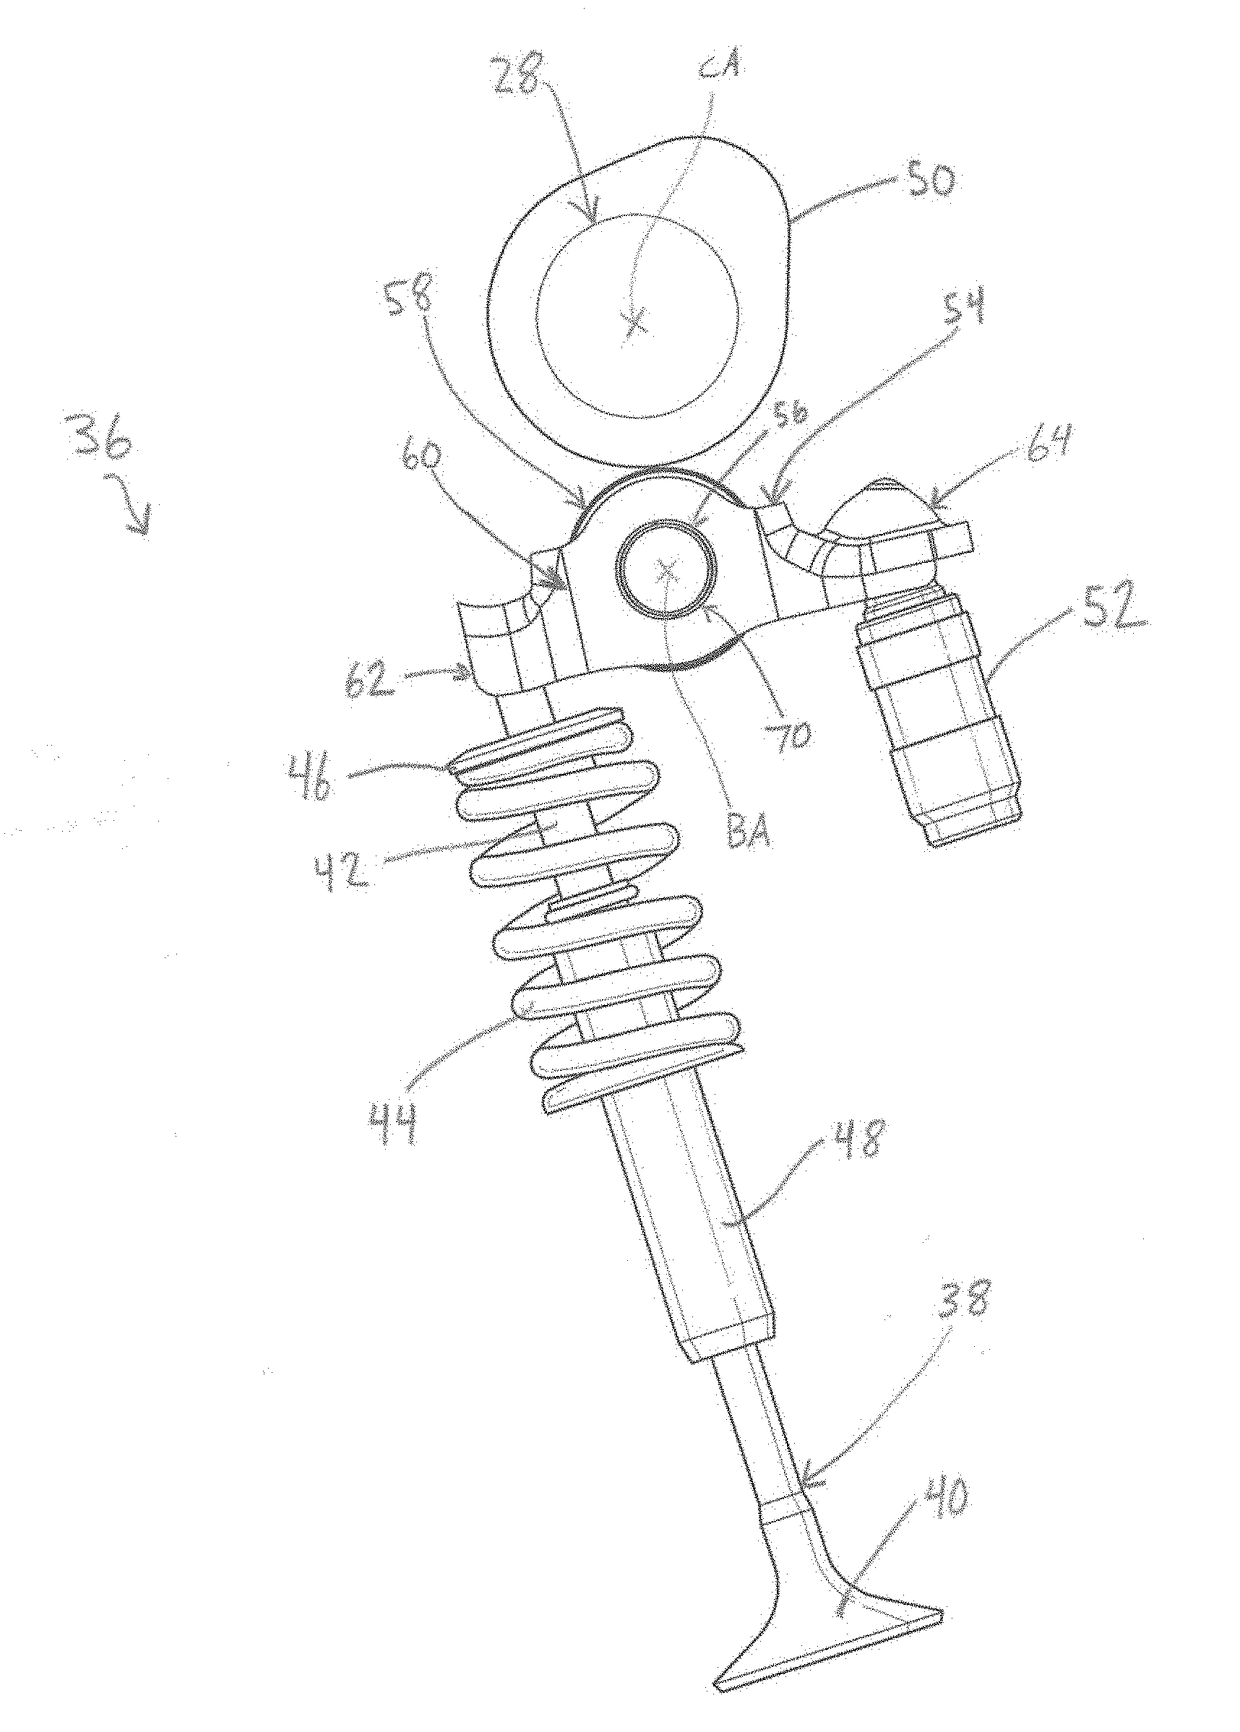 Finger follower assembly for use in a valvetrain of an internal combustion engine